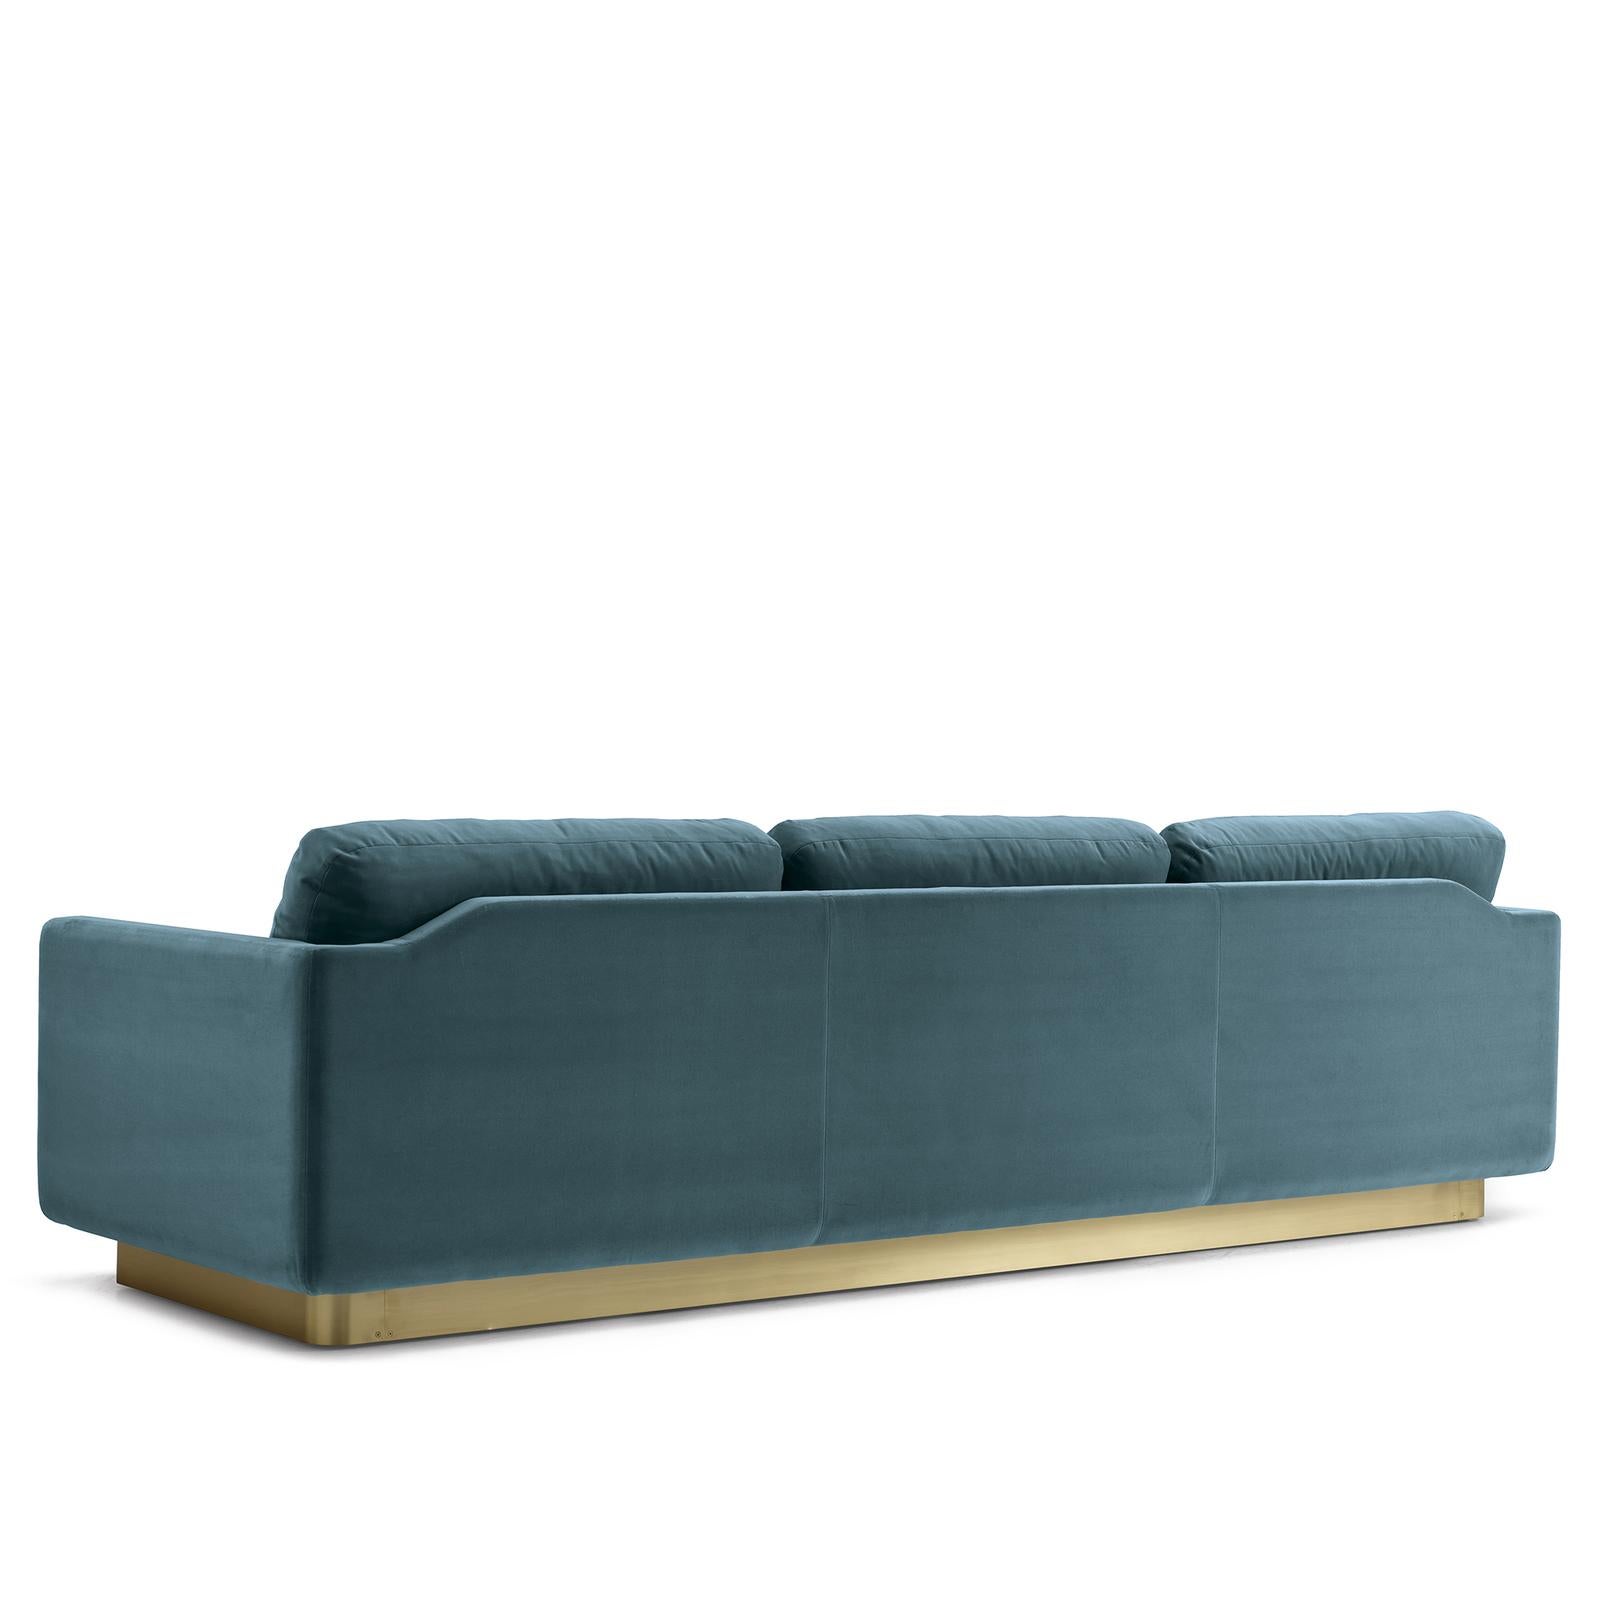 The clean, essential design of this sofa exudes subtle sophistication and a versatile profile. Resting on a satin brass base, the 3-seat structure is padded with multi-density rubber covered with a layer of memory foam and goose feathers, and